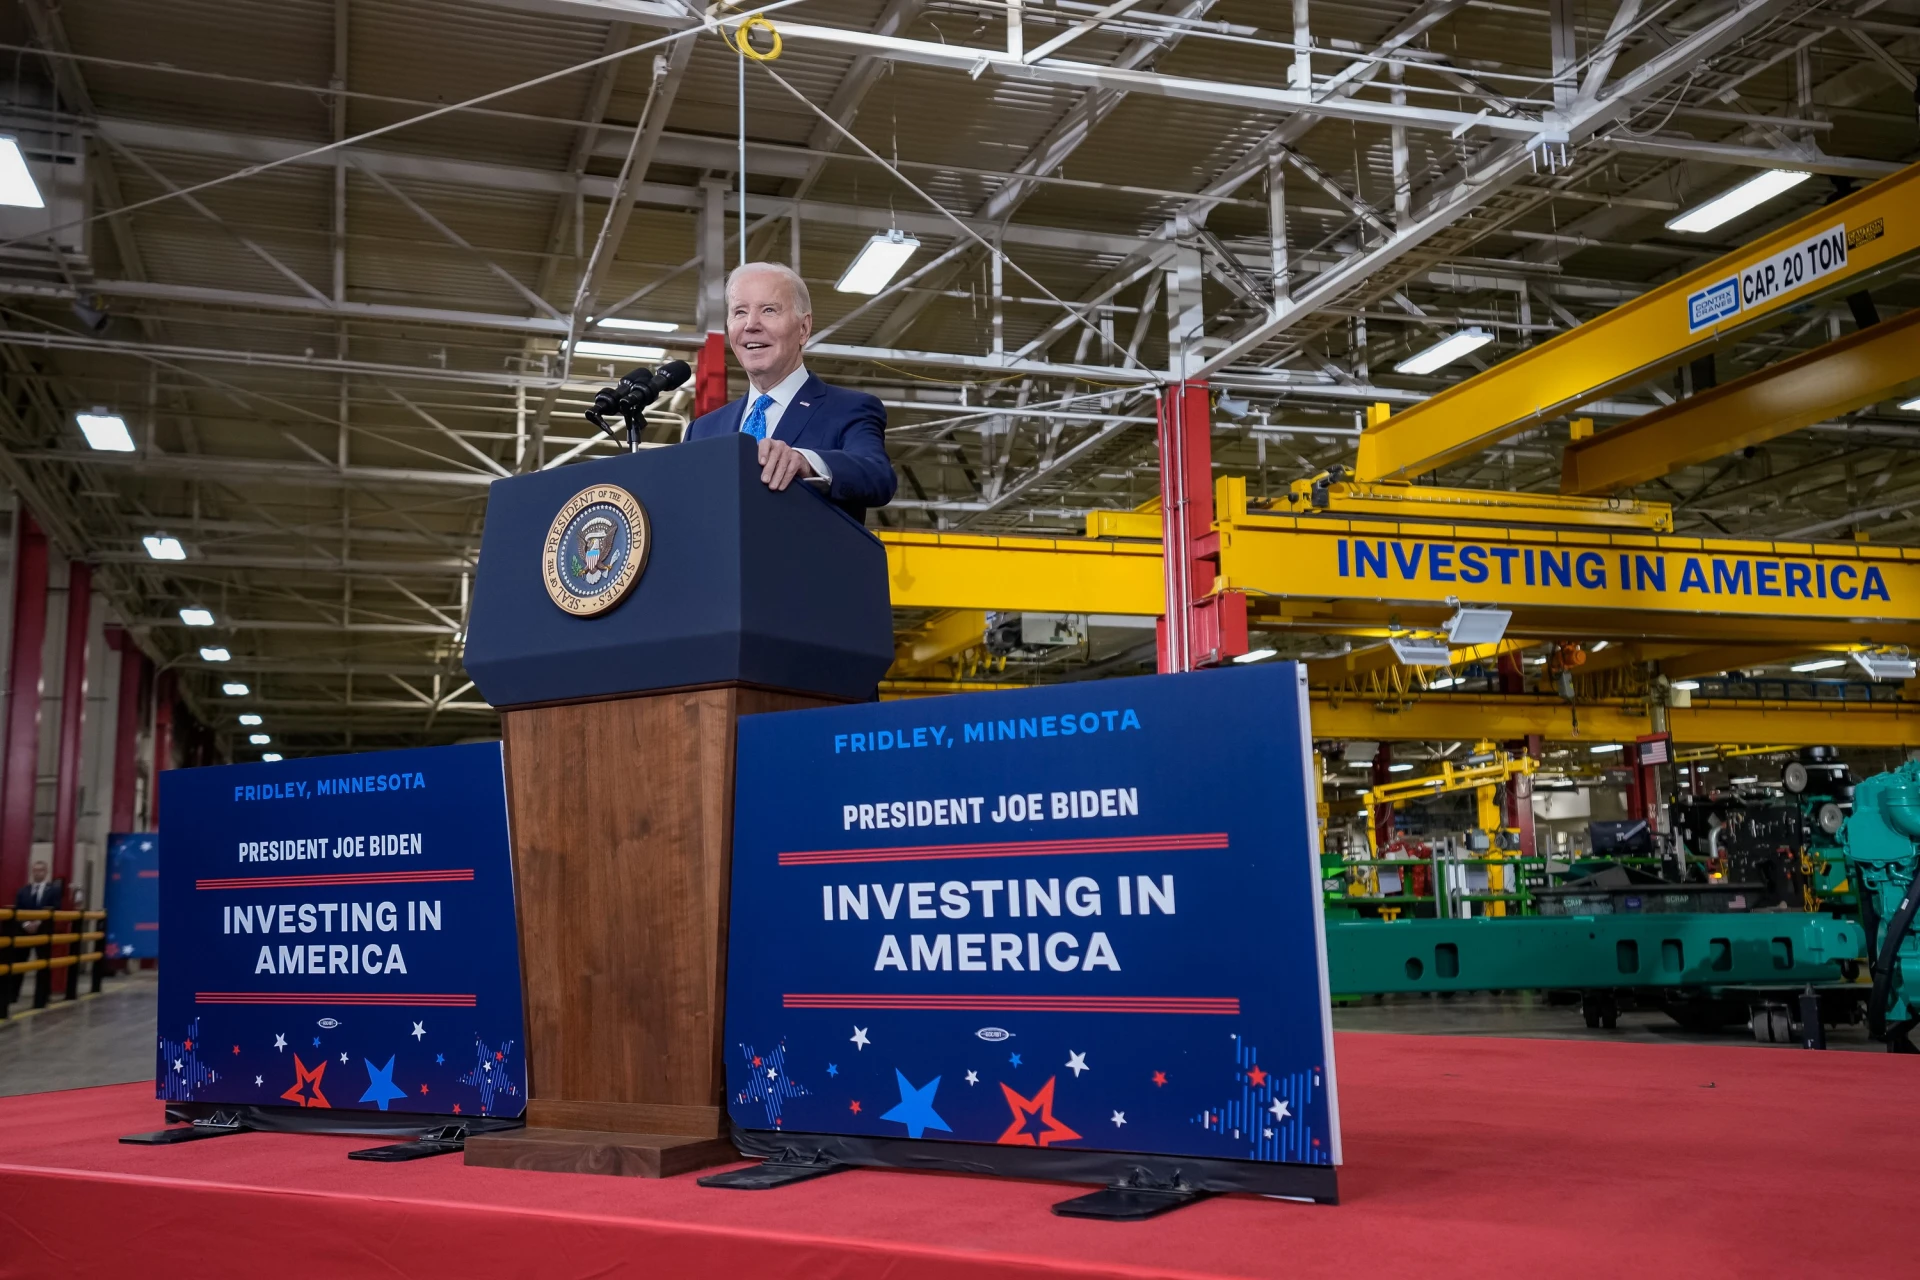 Remarks by President Biden on Investing in America, CW report